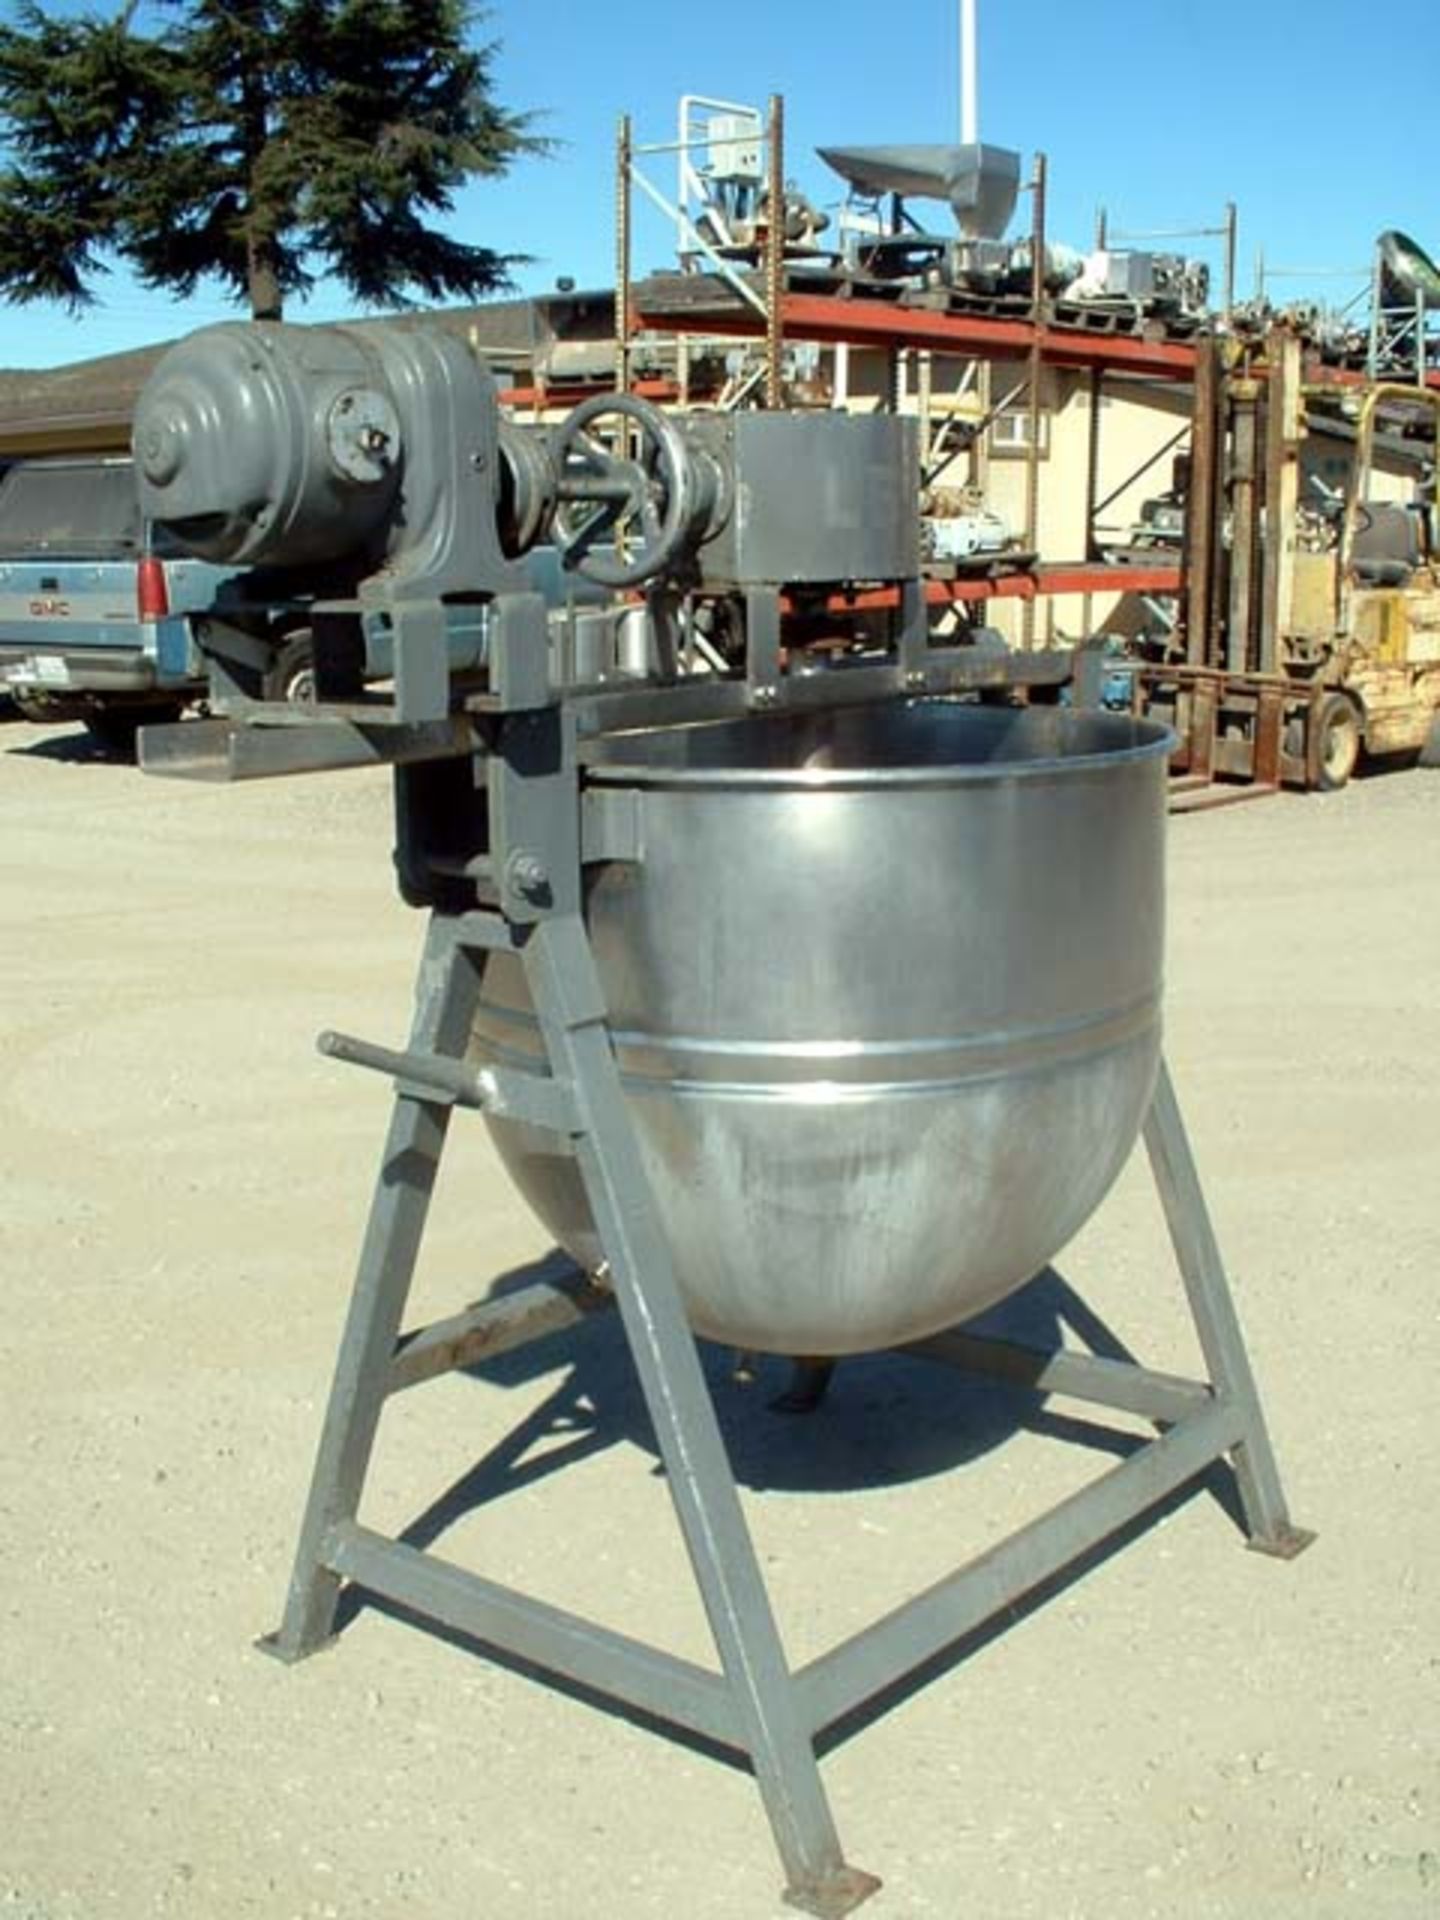 (Located in Morgan Hill, CA) Lee Kettle, Model 100 Gal, SN 868R, 100 PSI Jacket, 2 1/2" Outlet, S/S